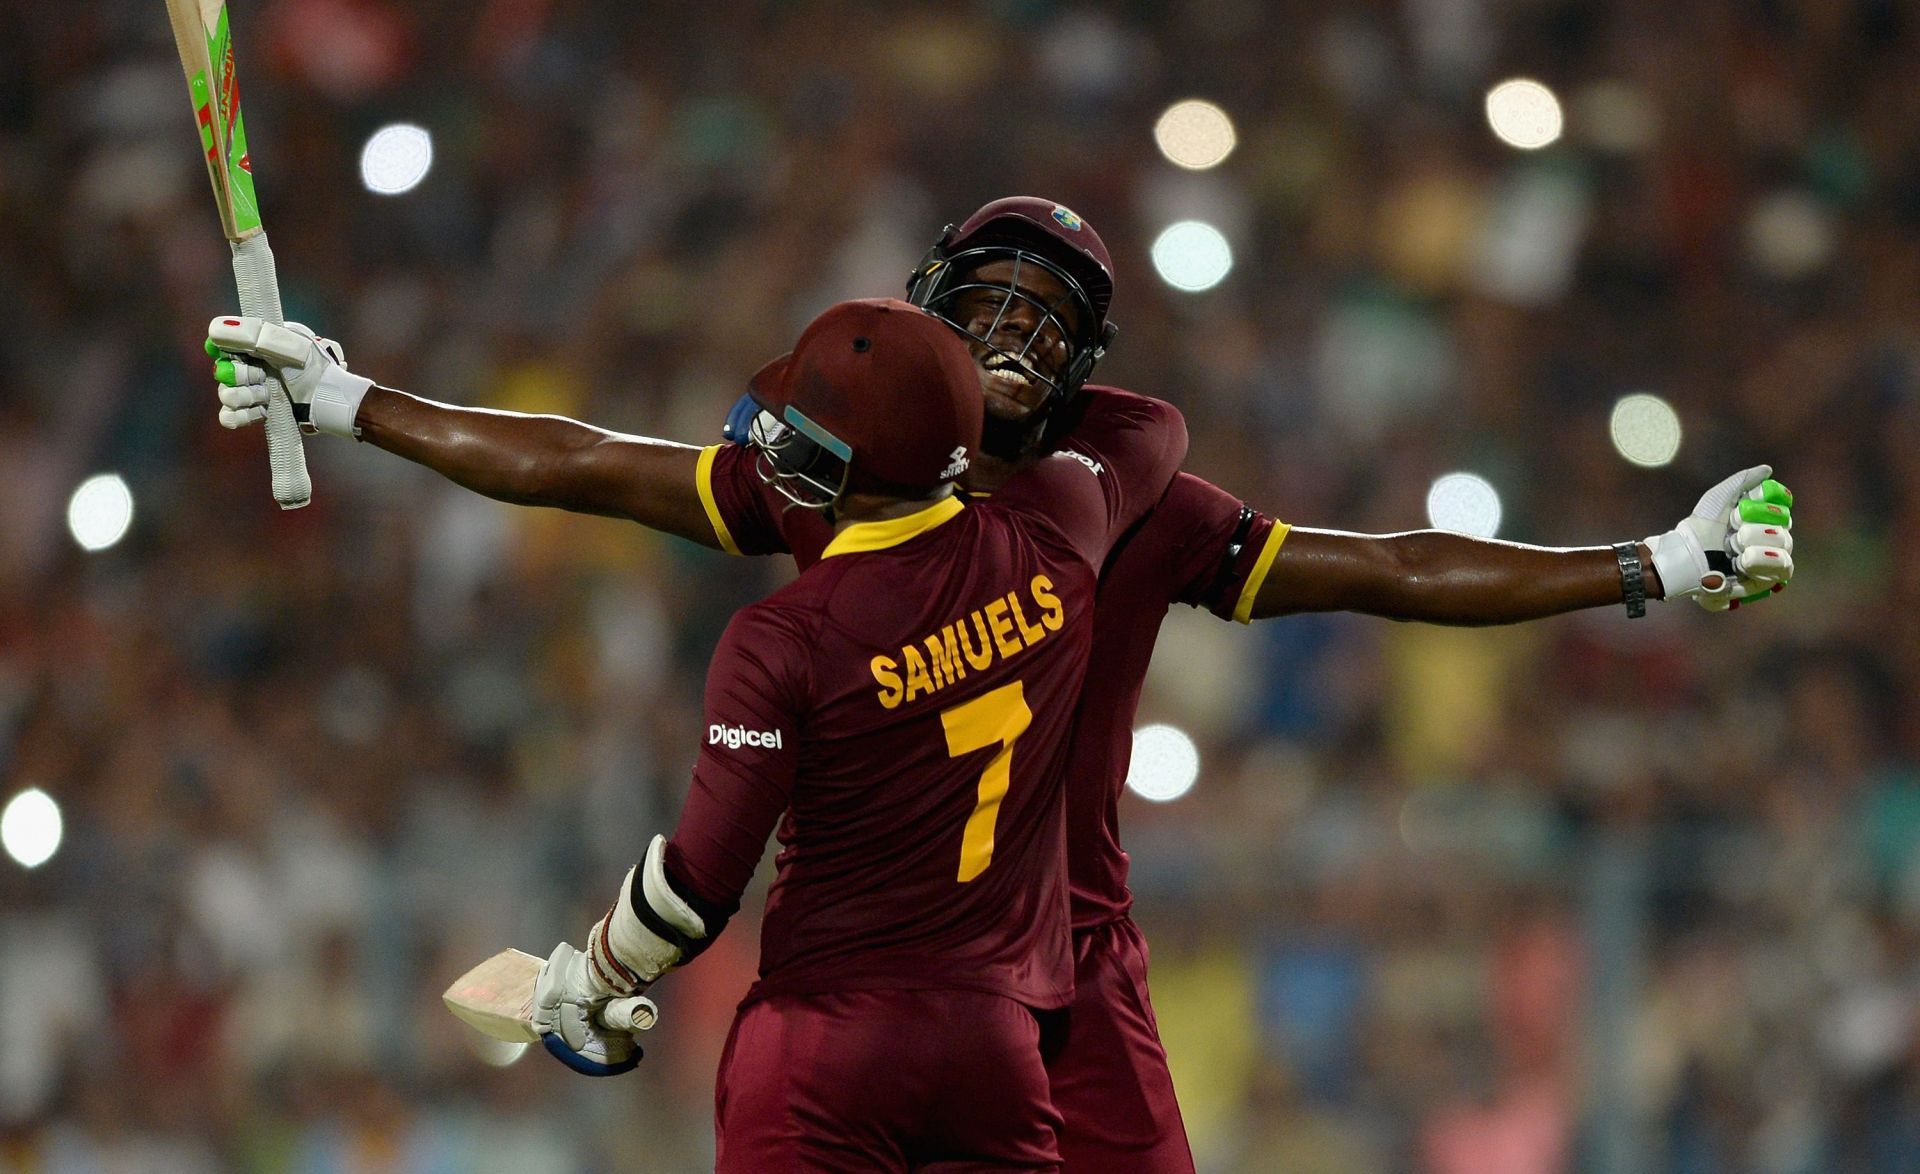 West Indies won the T20 World Cup for the second time in 2016. (Image Credit: Getty Images)